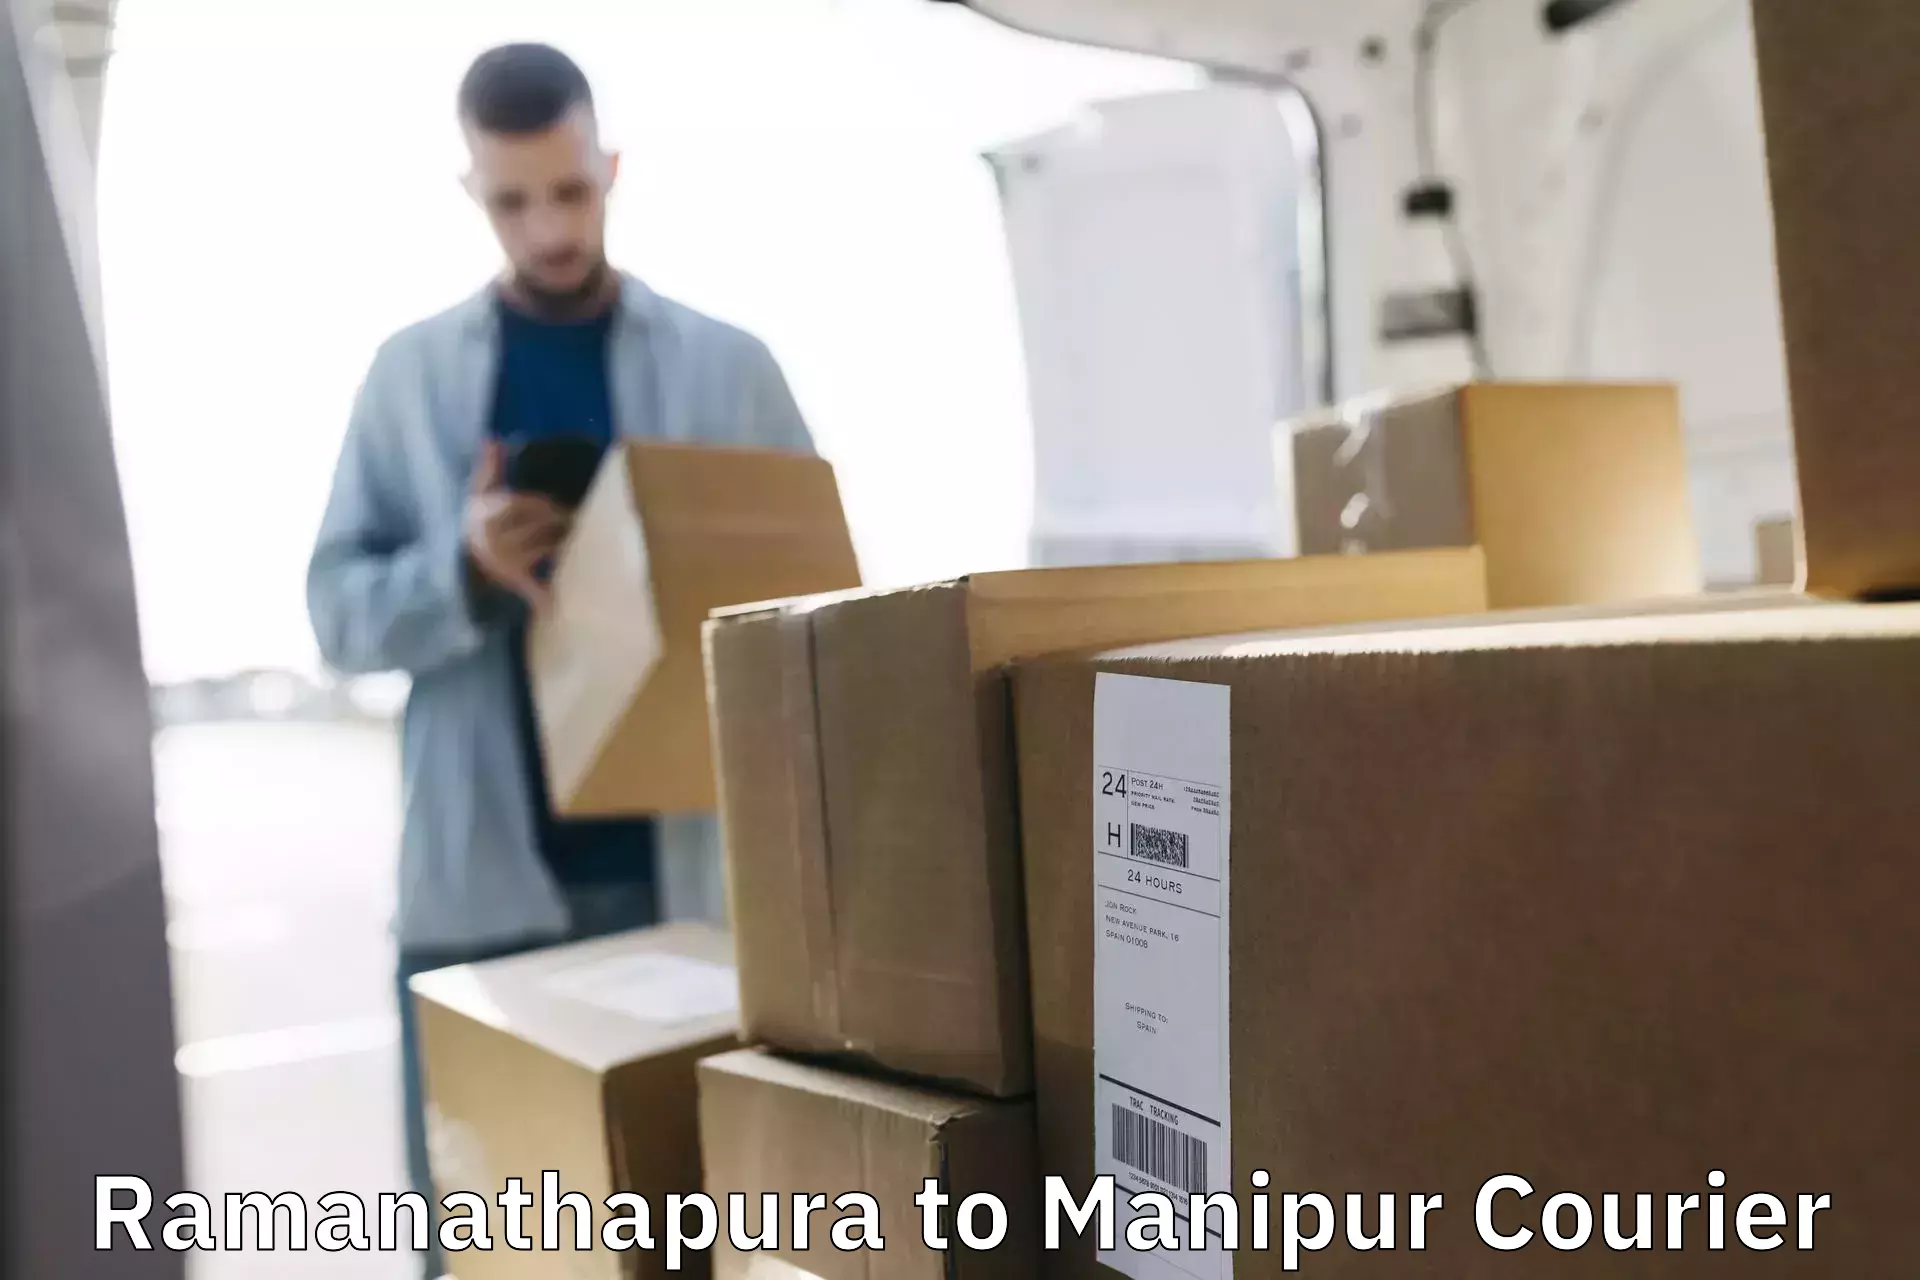 Courier service innovation Ramanathapura to Manipur